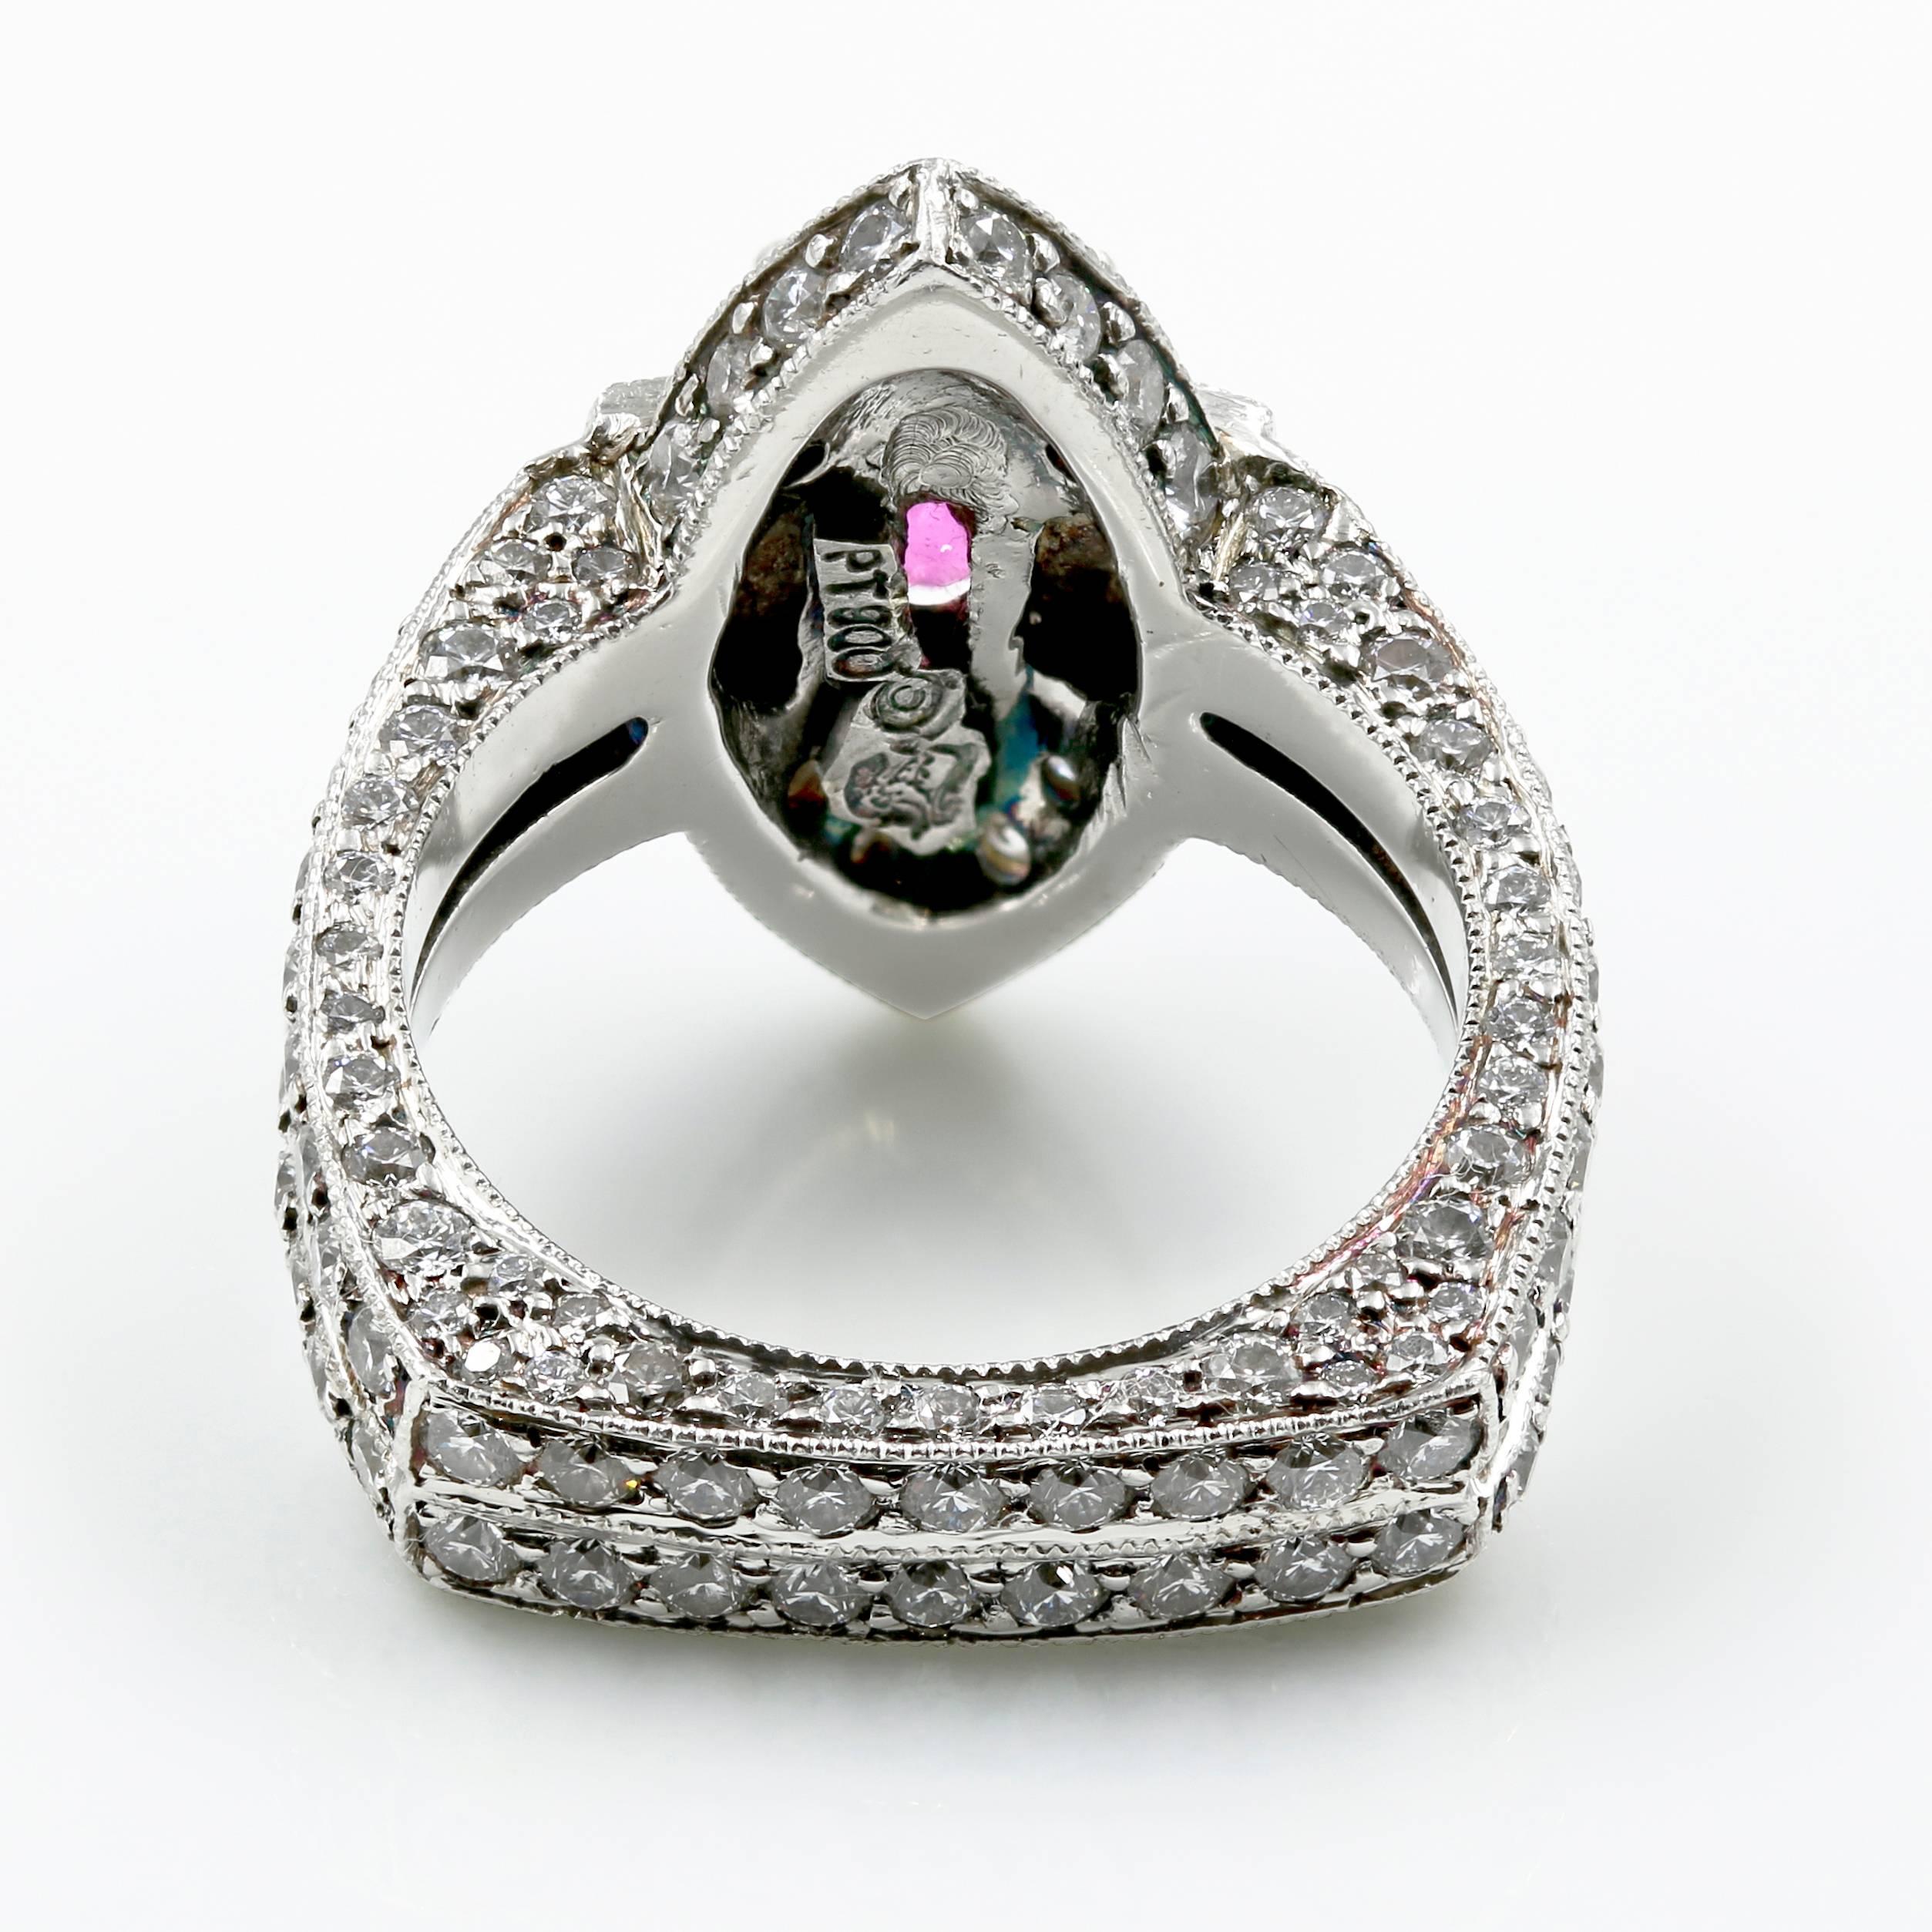 Oval Cut One-of-a-Kind 2.65 Carat Natural Pink Spinel and Diamond Ring